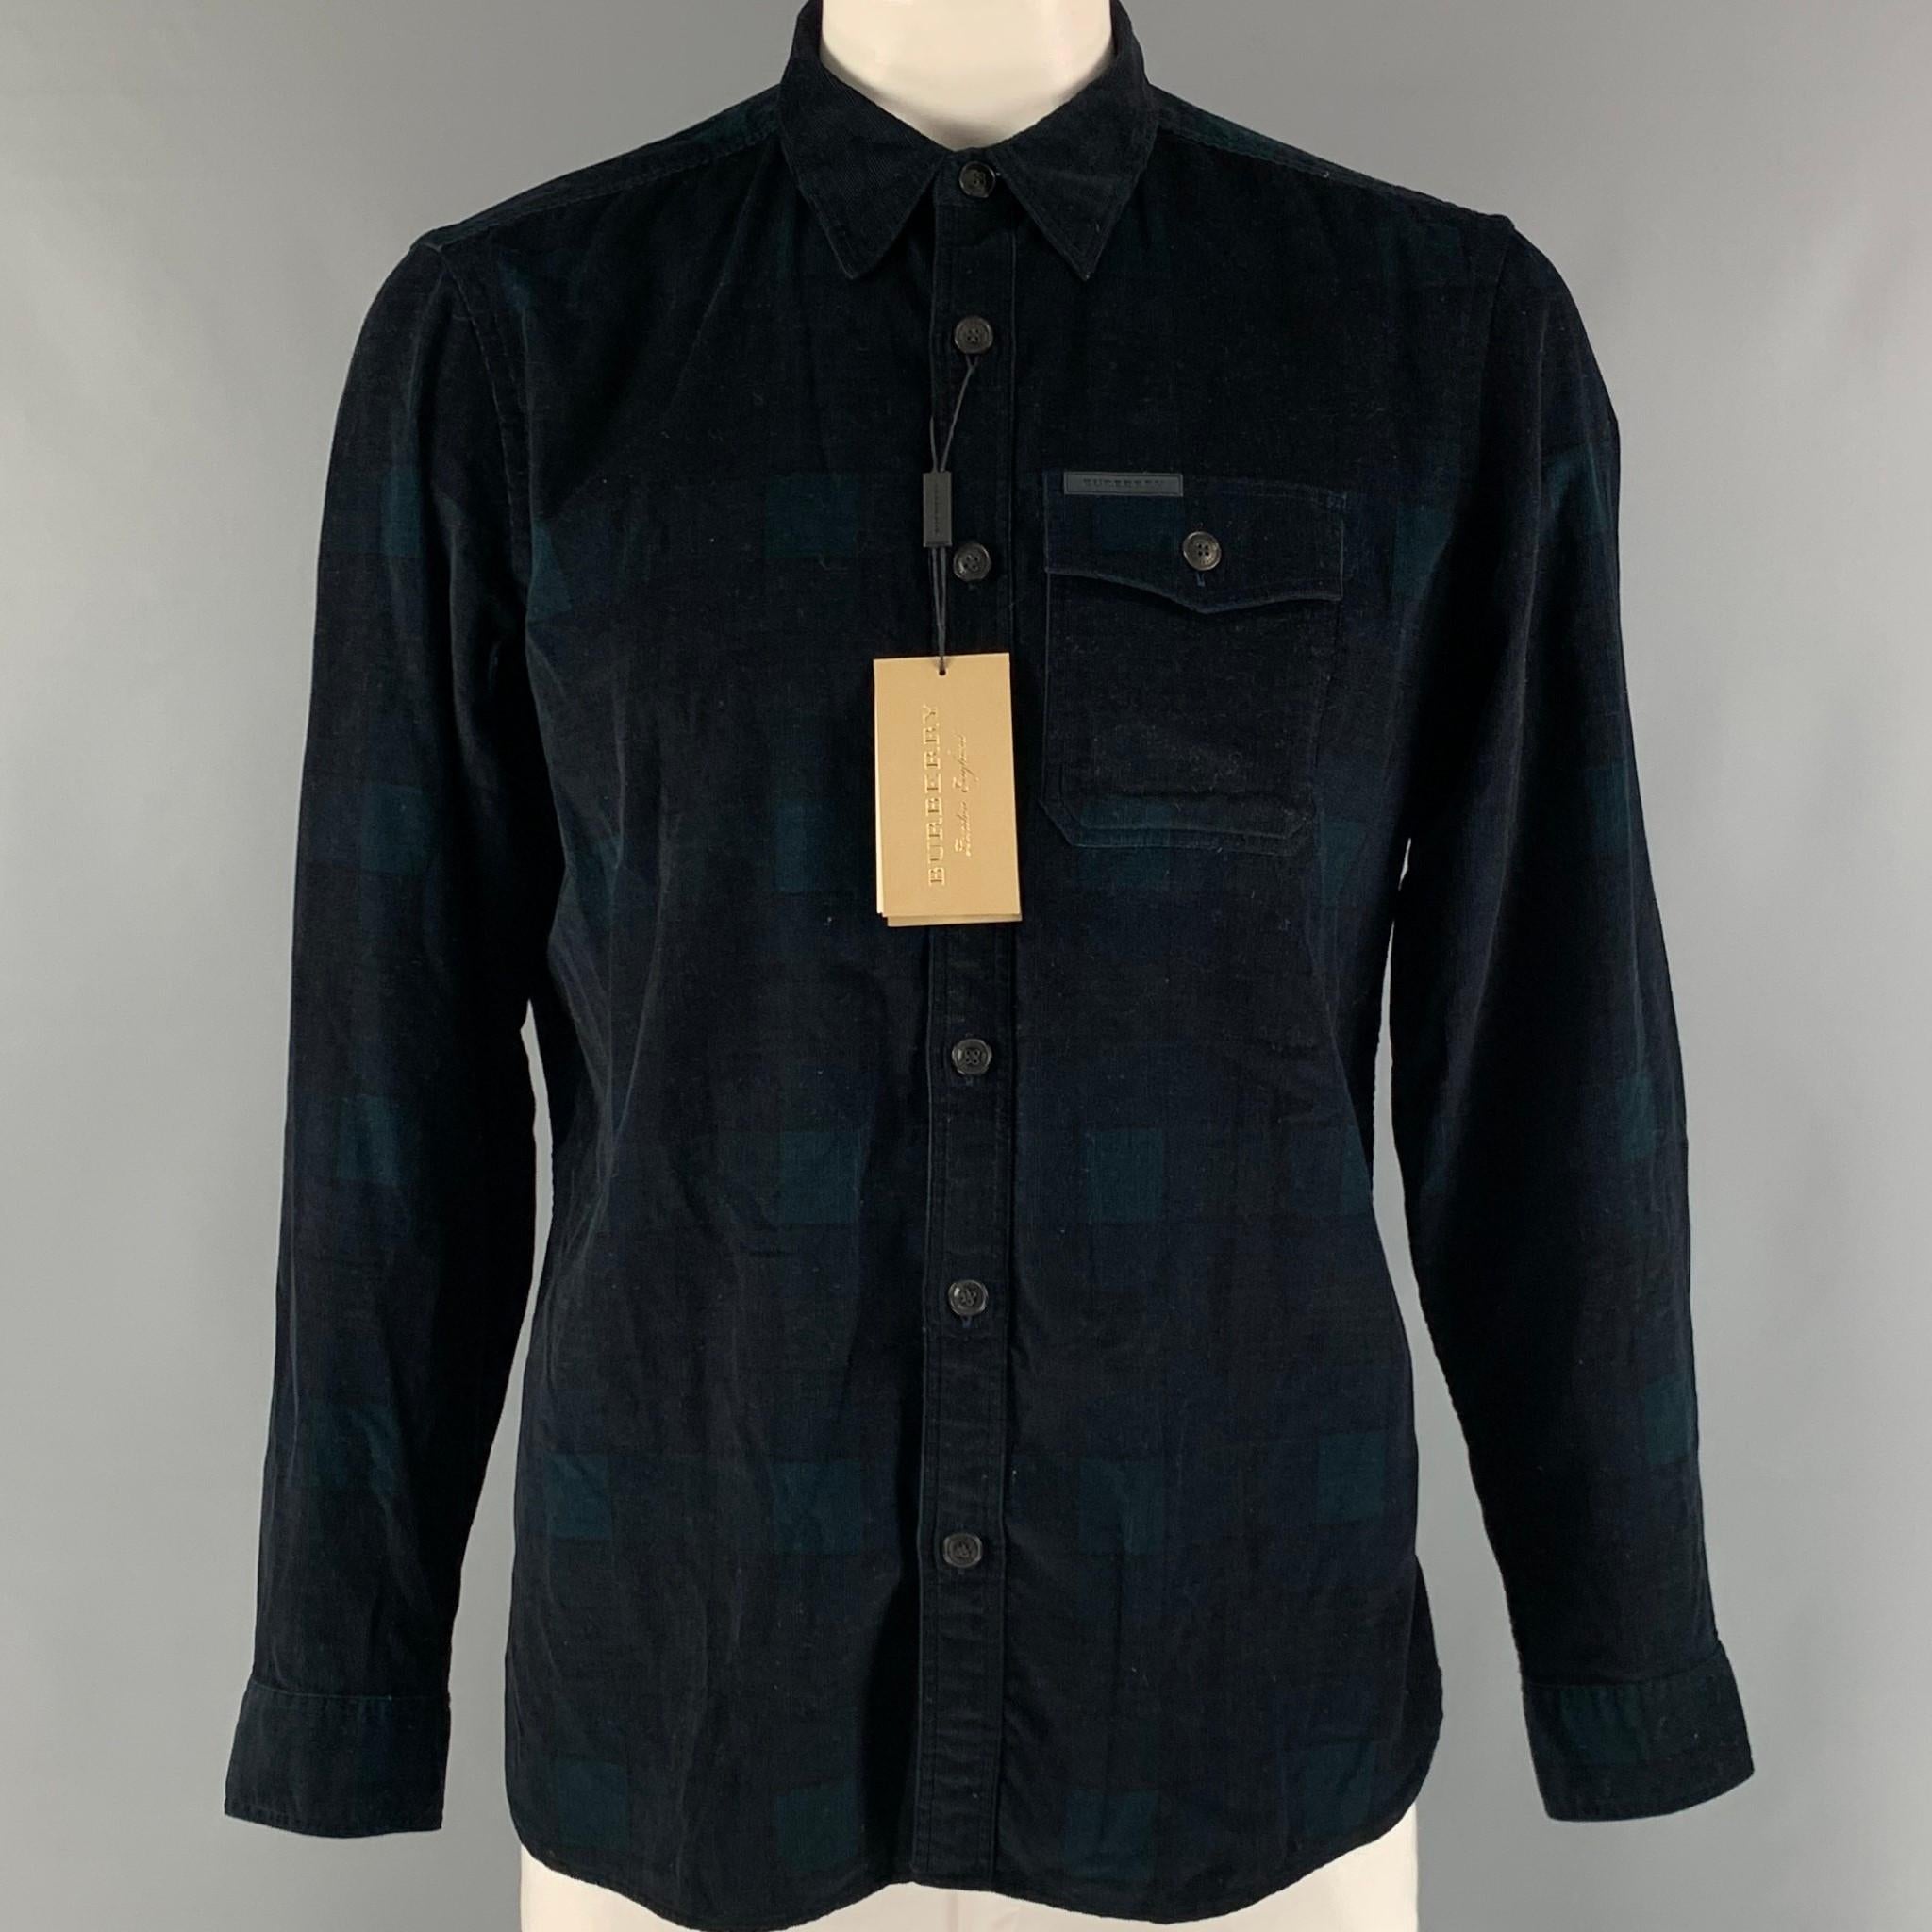 BURBERRY 'GOSHA RUBCHINSKIY' long sleeve shirt comes in a green and navy blackwatch plaid cotton corduroy material featuring front pockets, straight collar, and a button up closure. Made in Italy.

New with Tags.
Marked: XL

Measurements:

Shoulder: